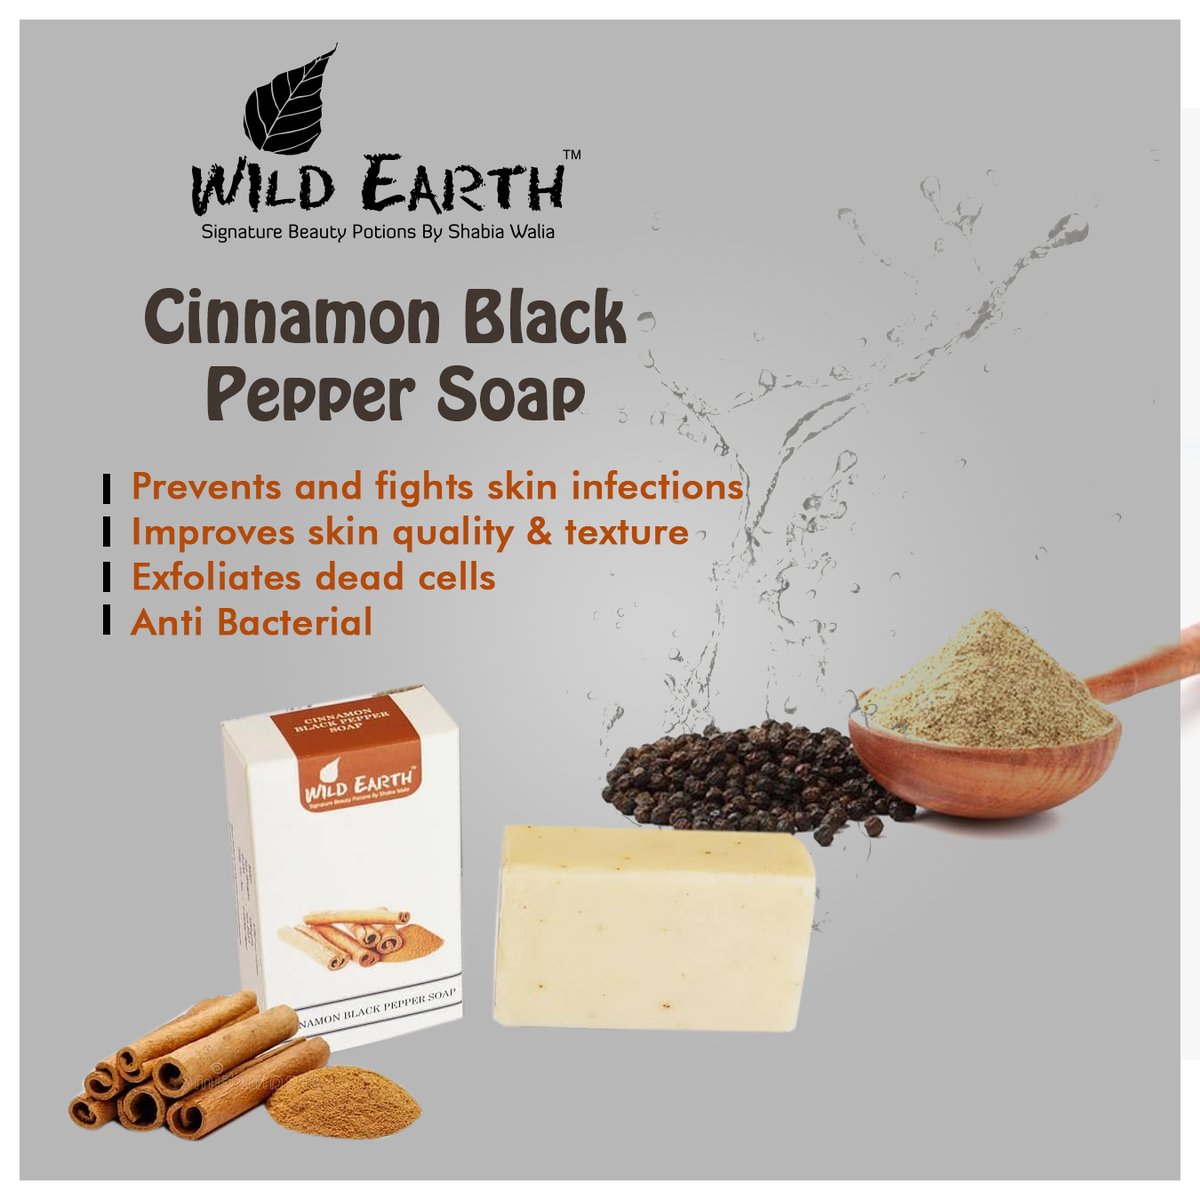 Free from palm oil, harmful chemicals, cruelty free & spiced with cinnamon & black pepper that are so, so good for your skin. Handcrafted by the Cold Process method to retain the goodness of Ayurveda 💞💞
#spicesinayurveda
#naturetotherescue 
#cinnamon
#blackpepper
#handmadesoaps